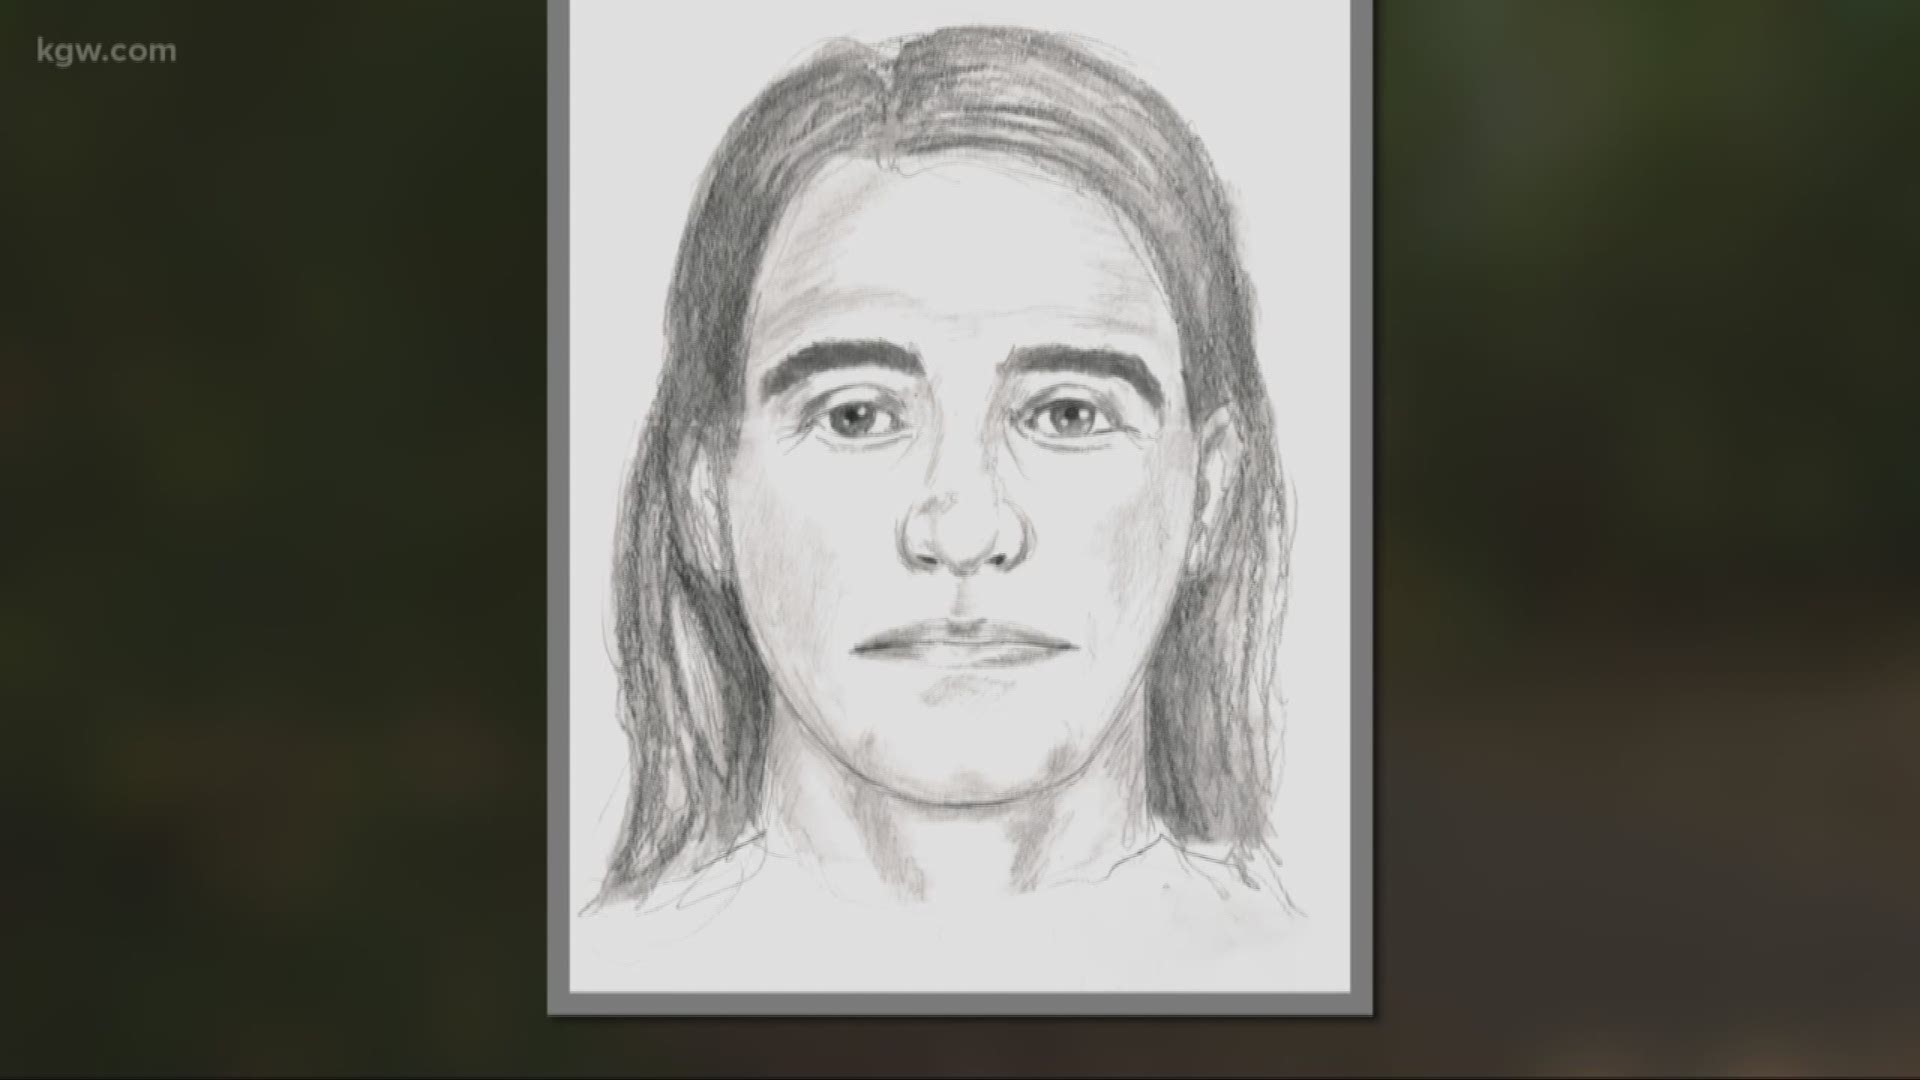 Detectives are asking for the public's help to locate a suspect who sexually assaulted a woman in Washington County last month.